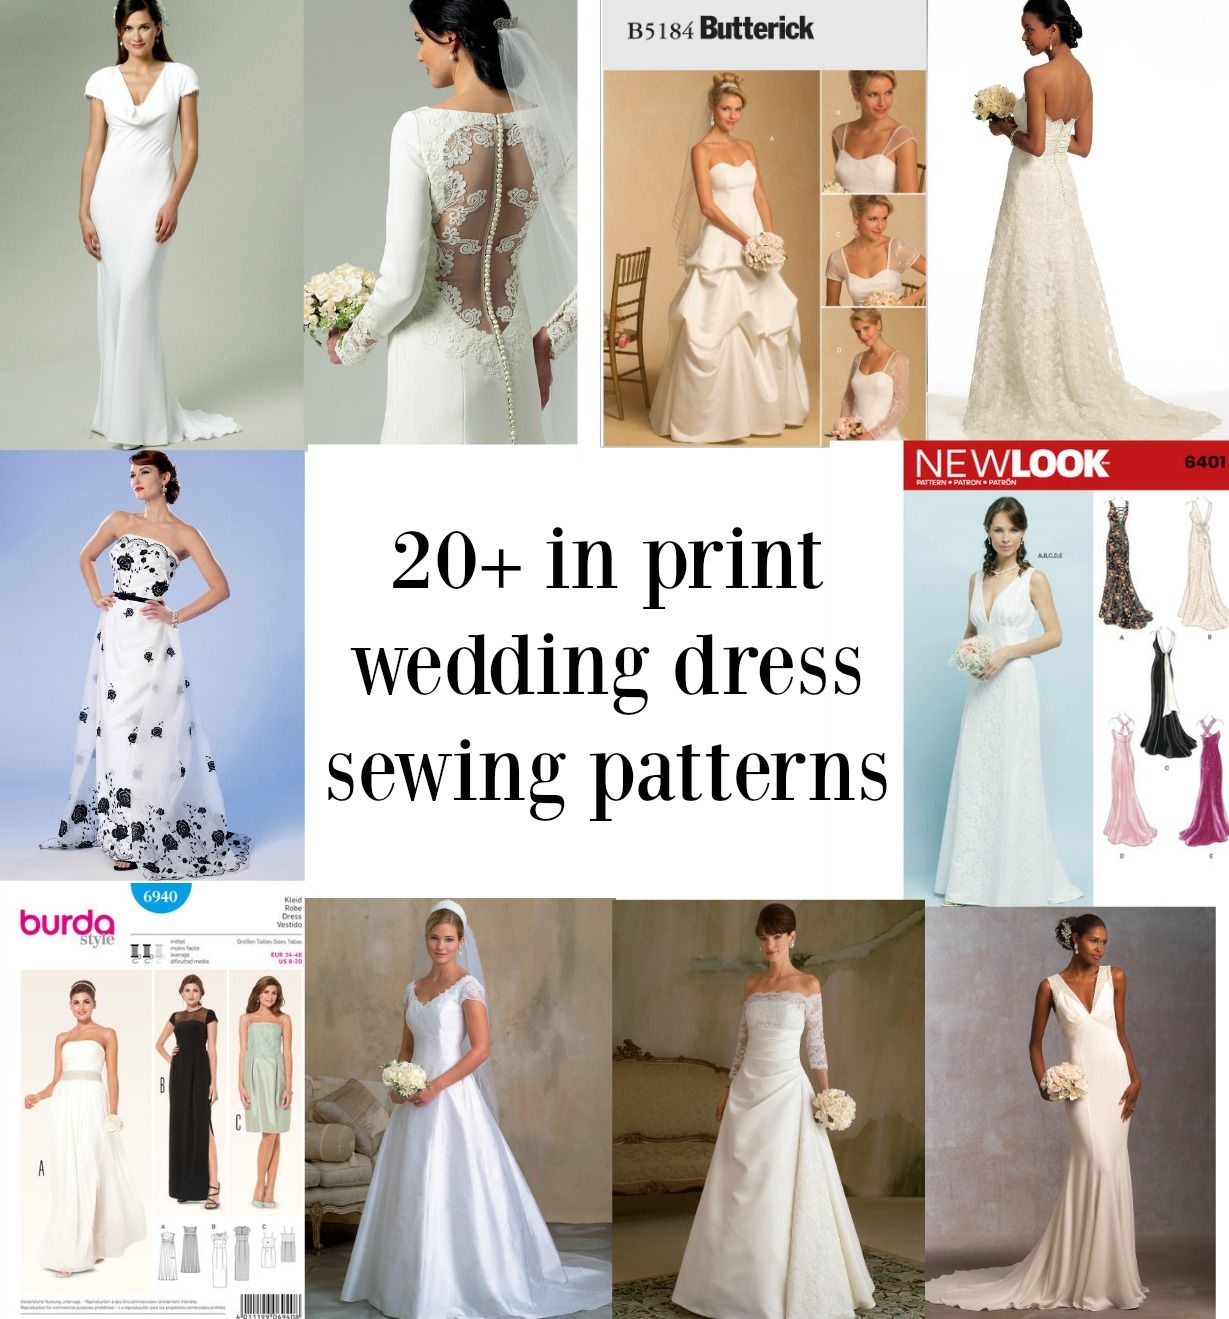 Wedding Dress Patterns To Sew Links To Over Twenty In Print Bridal Gown Sewing Patterns Sewing